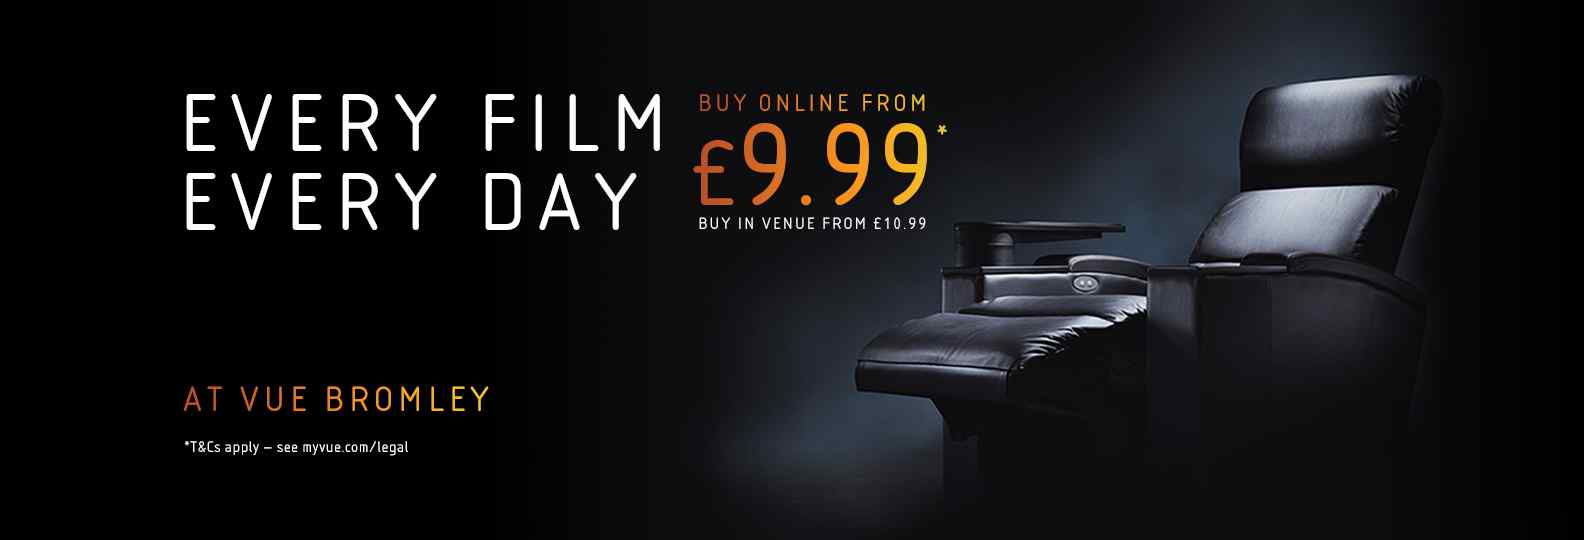 Vue Bromley | Every Film, Every Day from £9.99